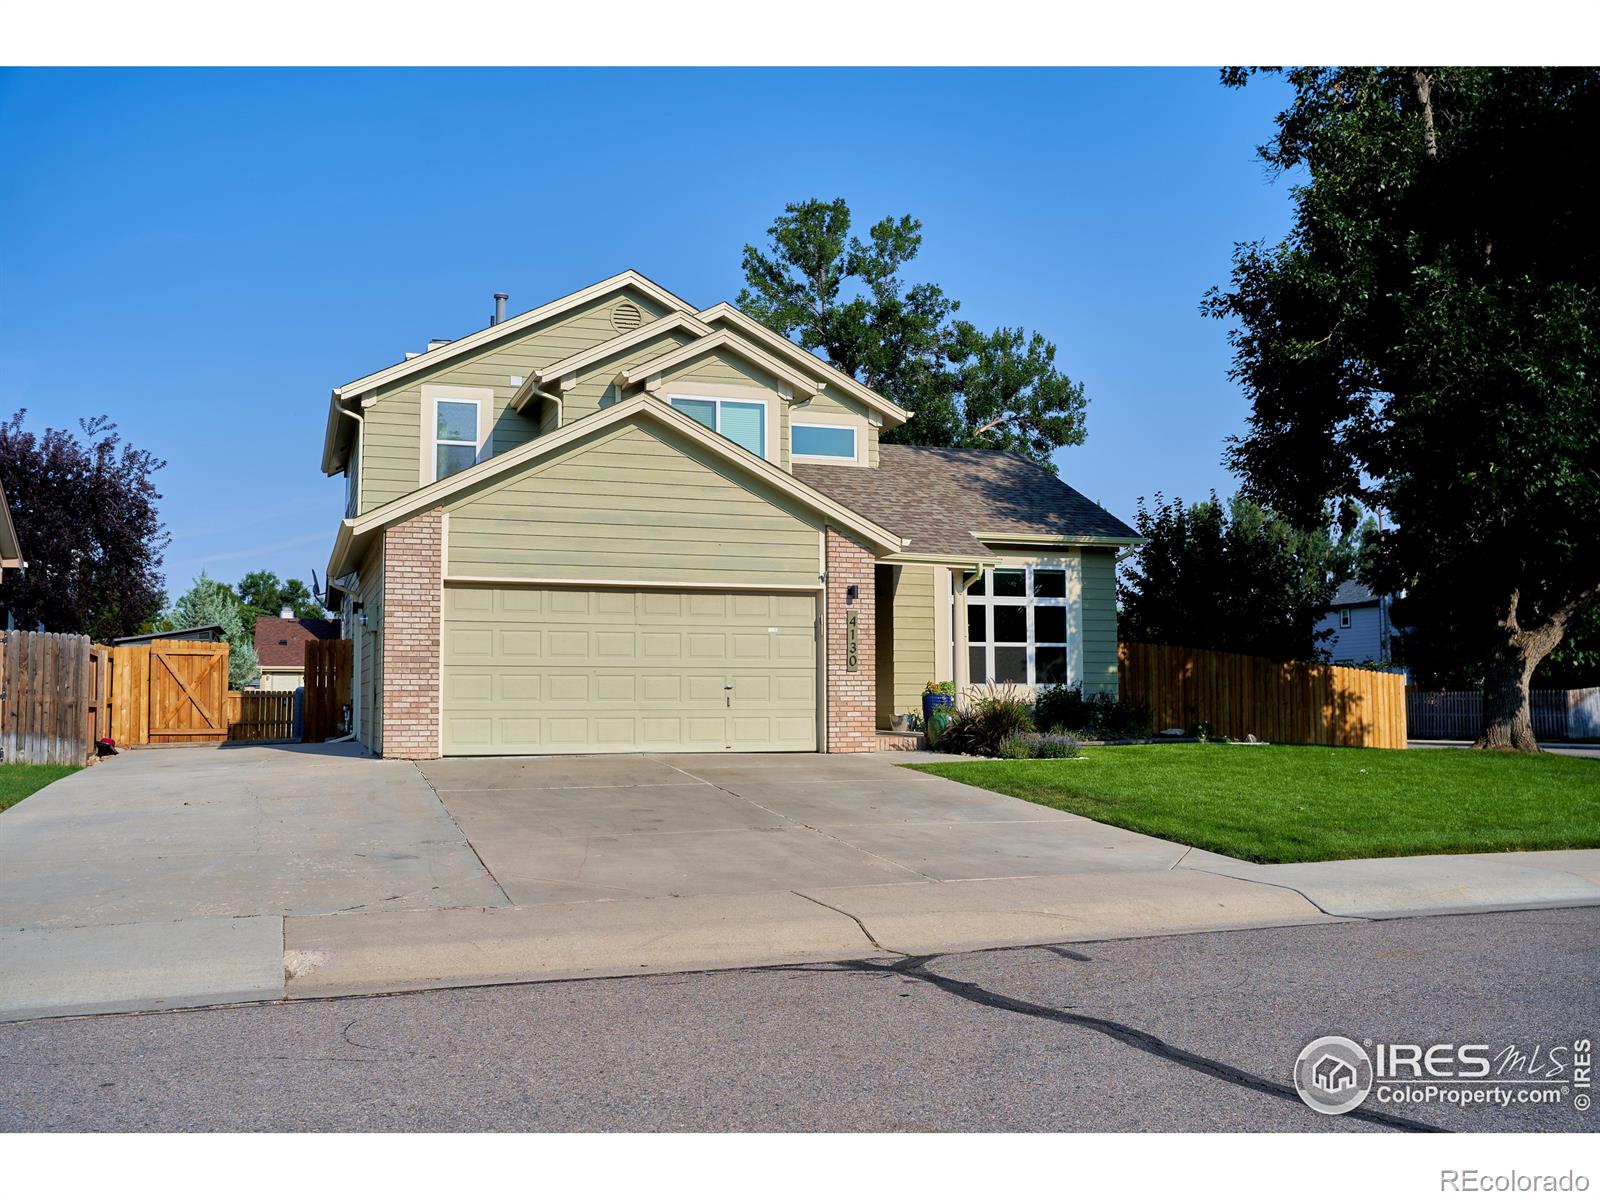 Report Image for 4130  Suncrest Drive,Fort Collins, Colorado